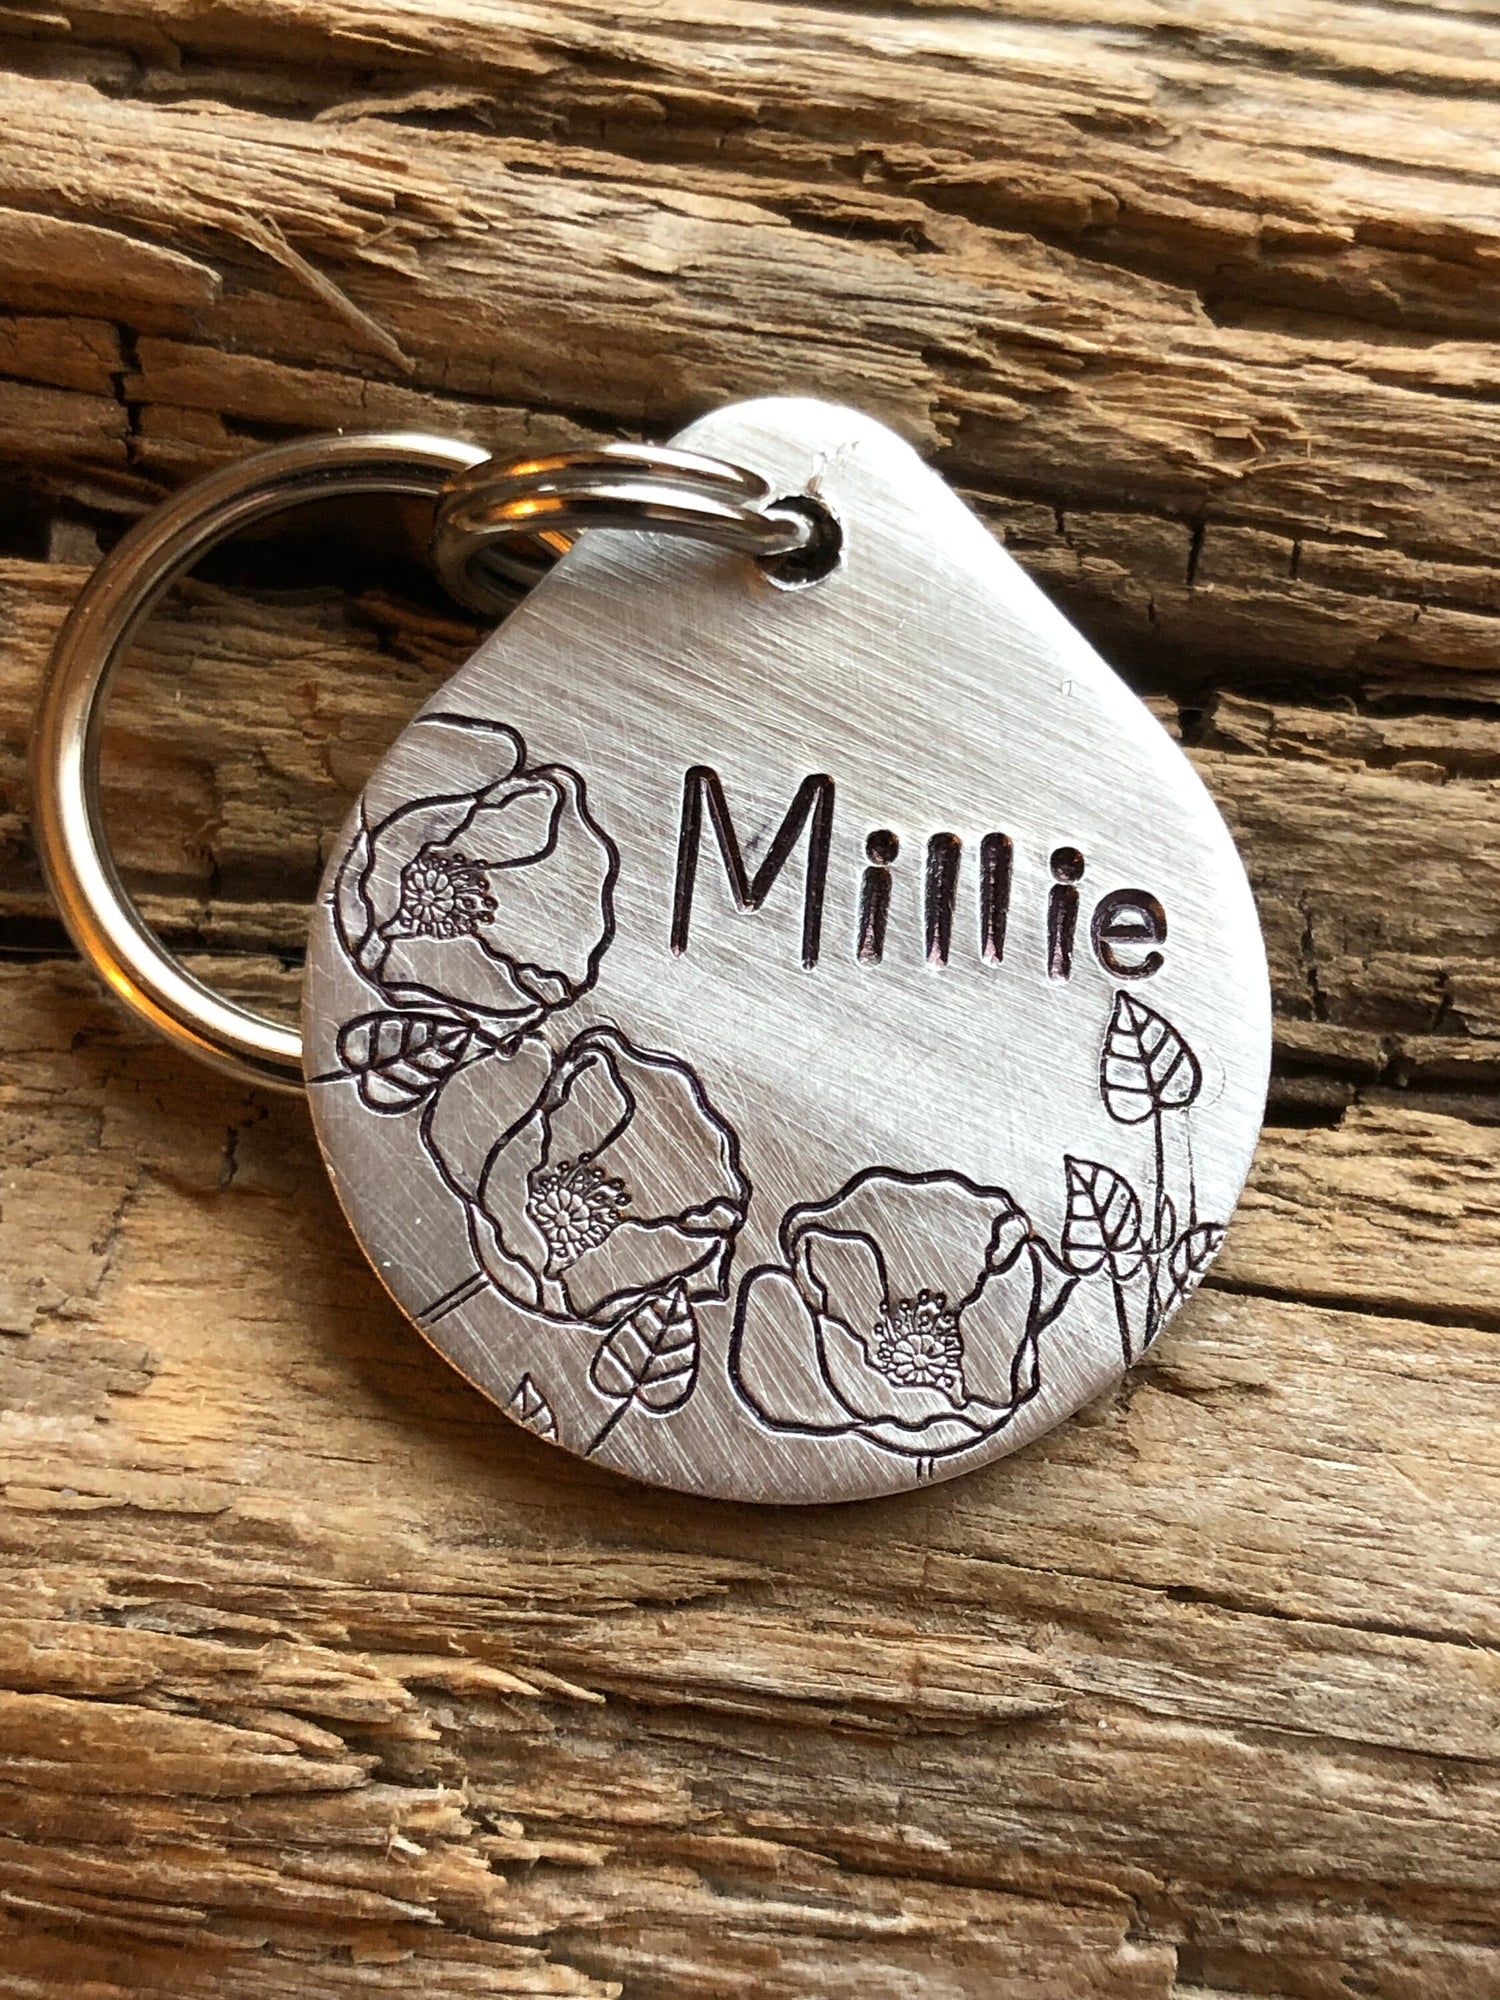 Dog Tag, Dog ID Tag, Hand Stamped Dog Tag, Dog Tag for Collar, Pet ID Tag, Personalized Tag, The Millie, Oval Tag with Flowers, Poppy